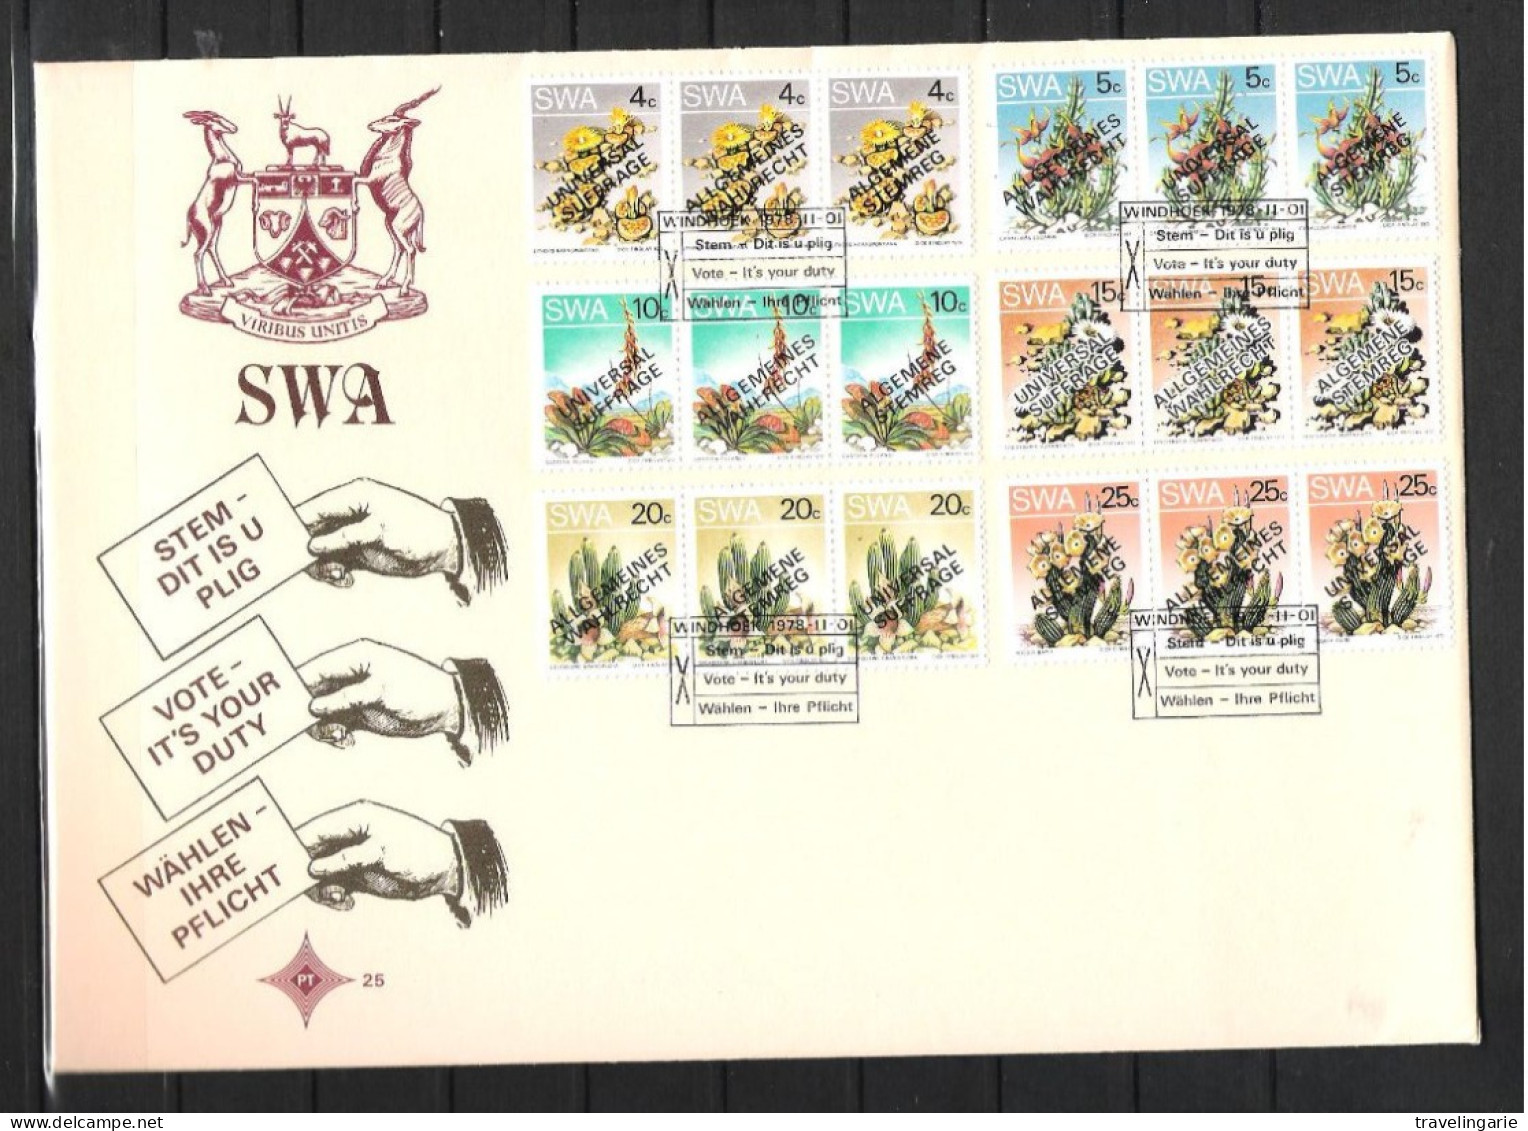 South West Africa 1978 Election Overprint Cactus Stamps FDC No. 25 - Cactussen